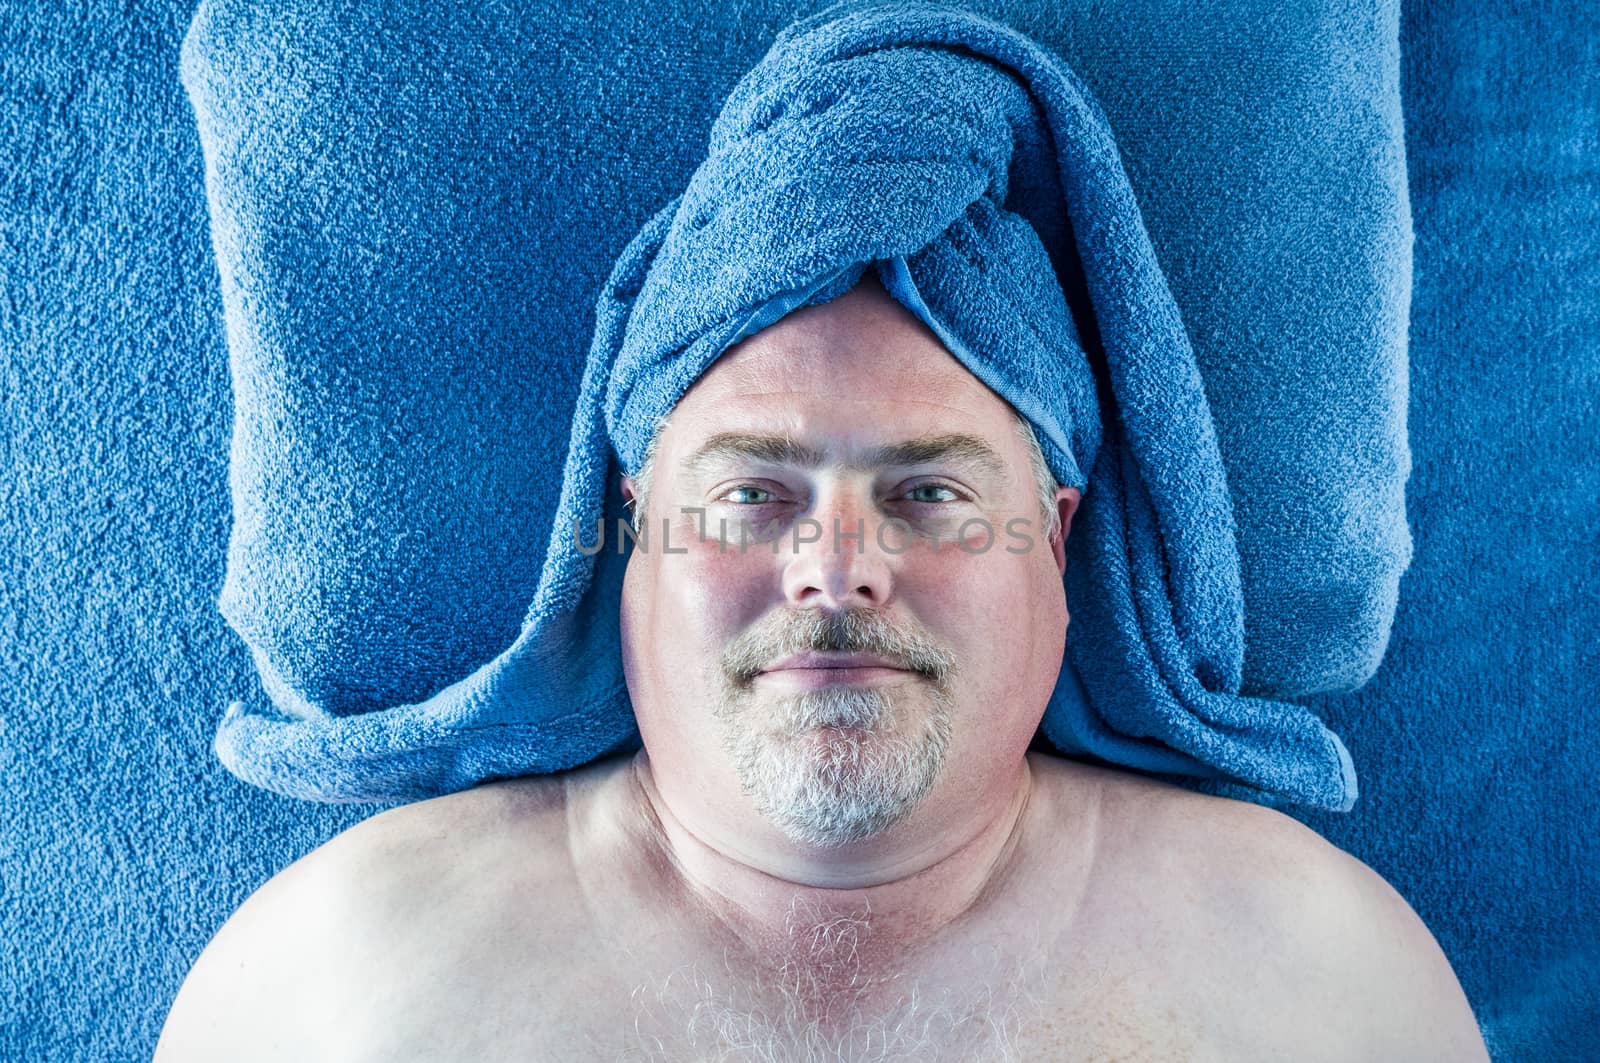 Man in blue turban towel at the spa